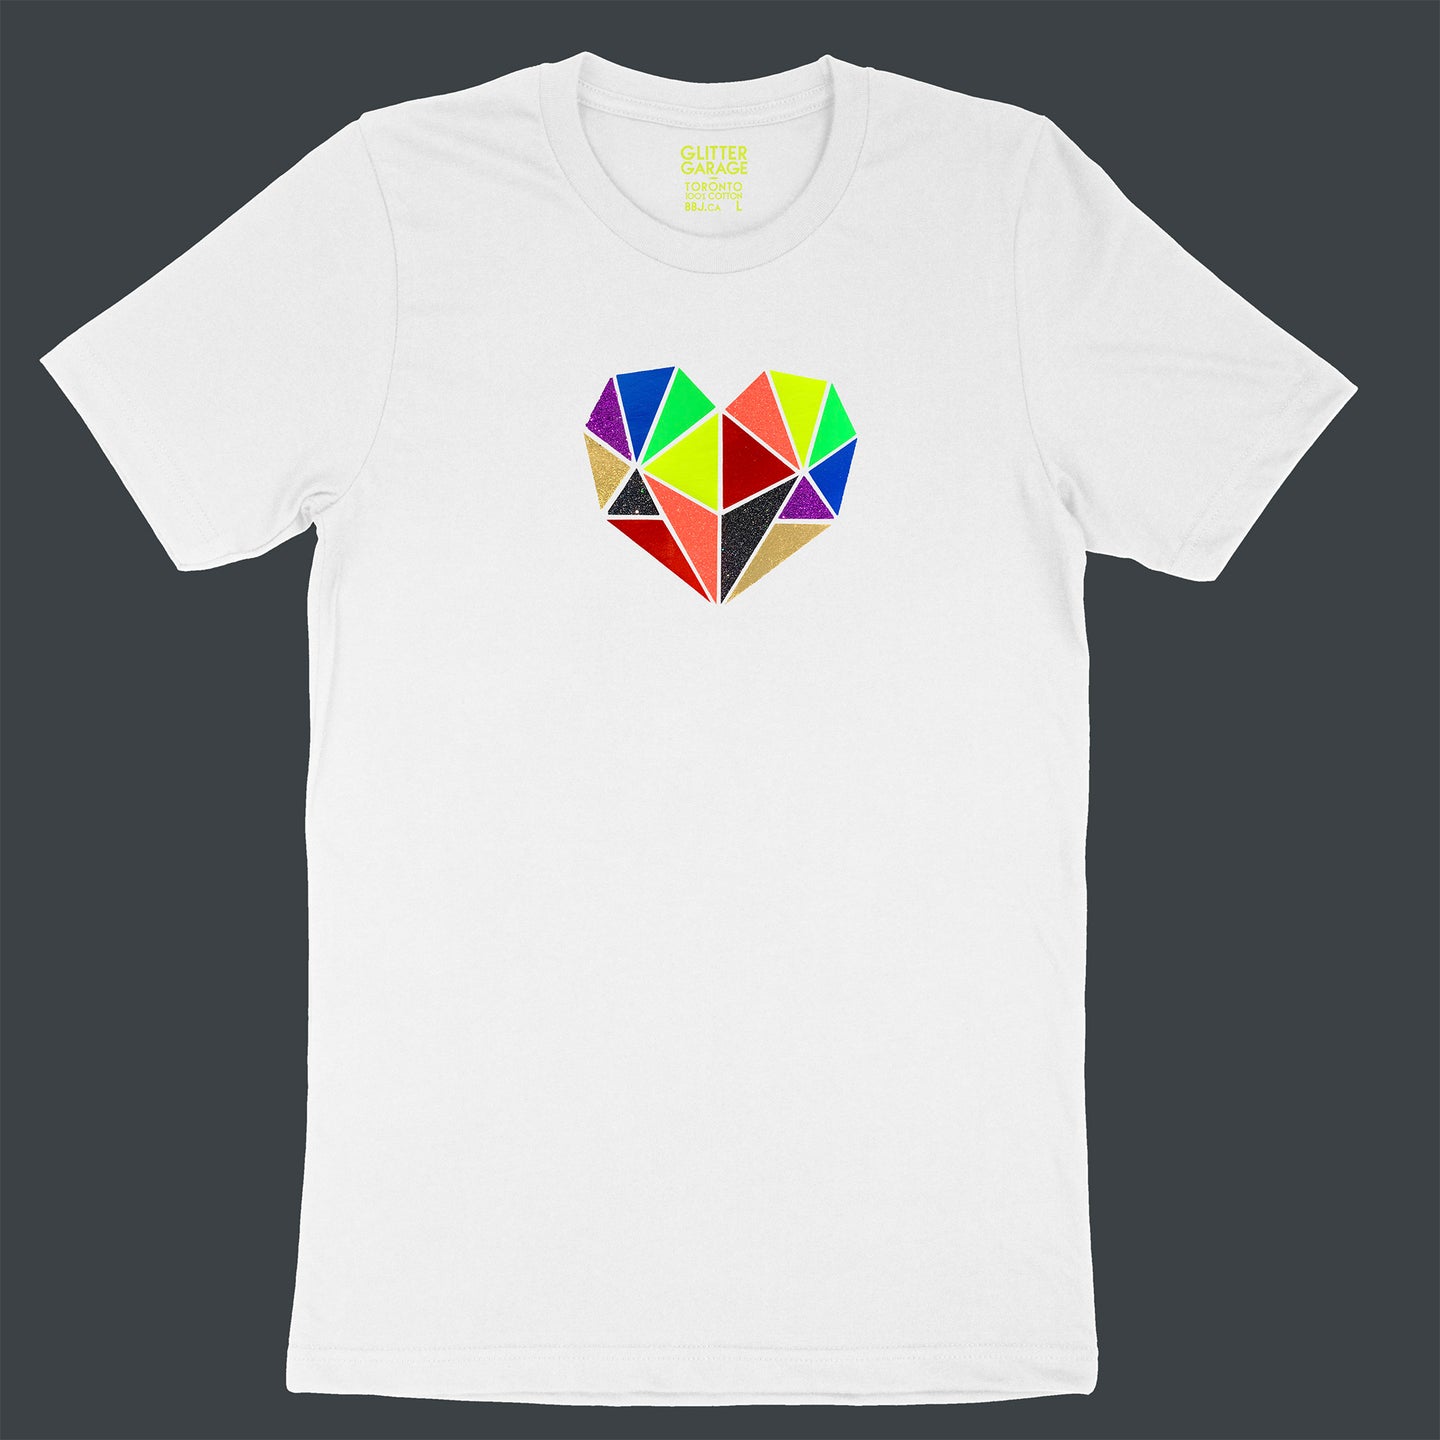 Vibrant rainbow faceted heart design with hand-applied neon, metallic and glitter vinyl on white unisex t-shirt - by BBJ / Glitter Garage